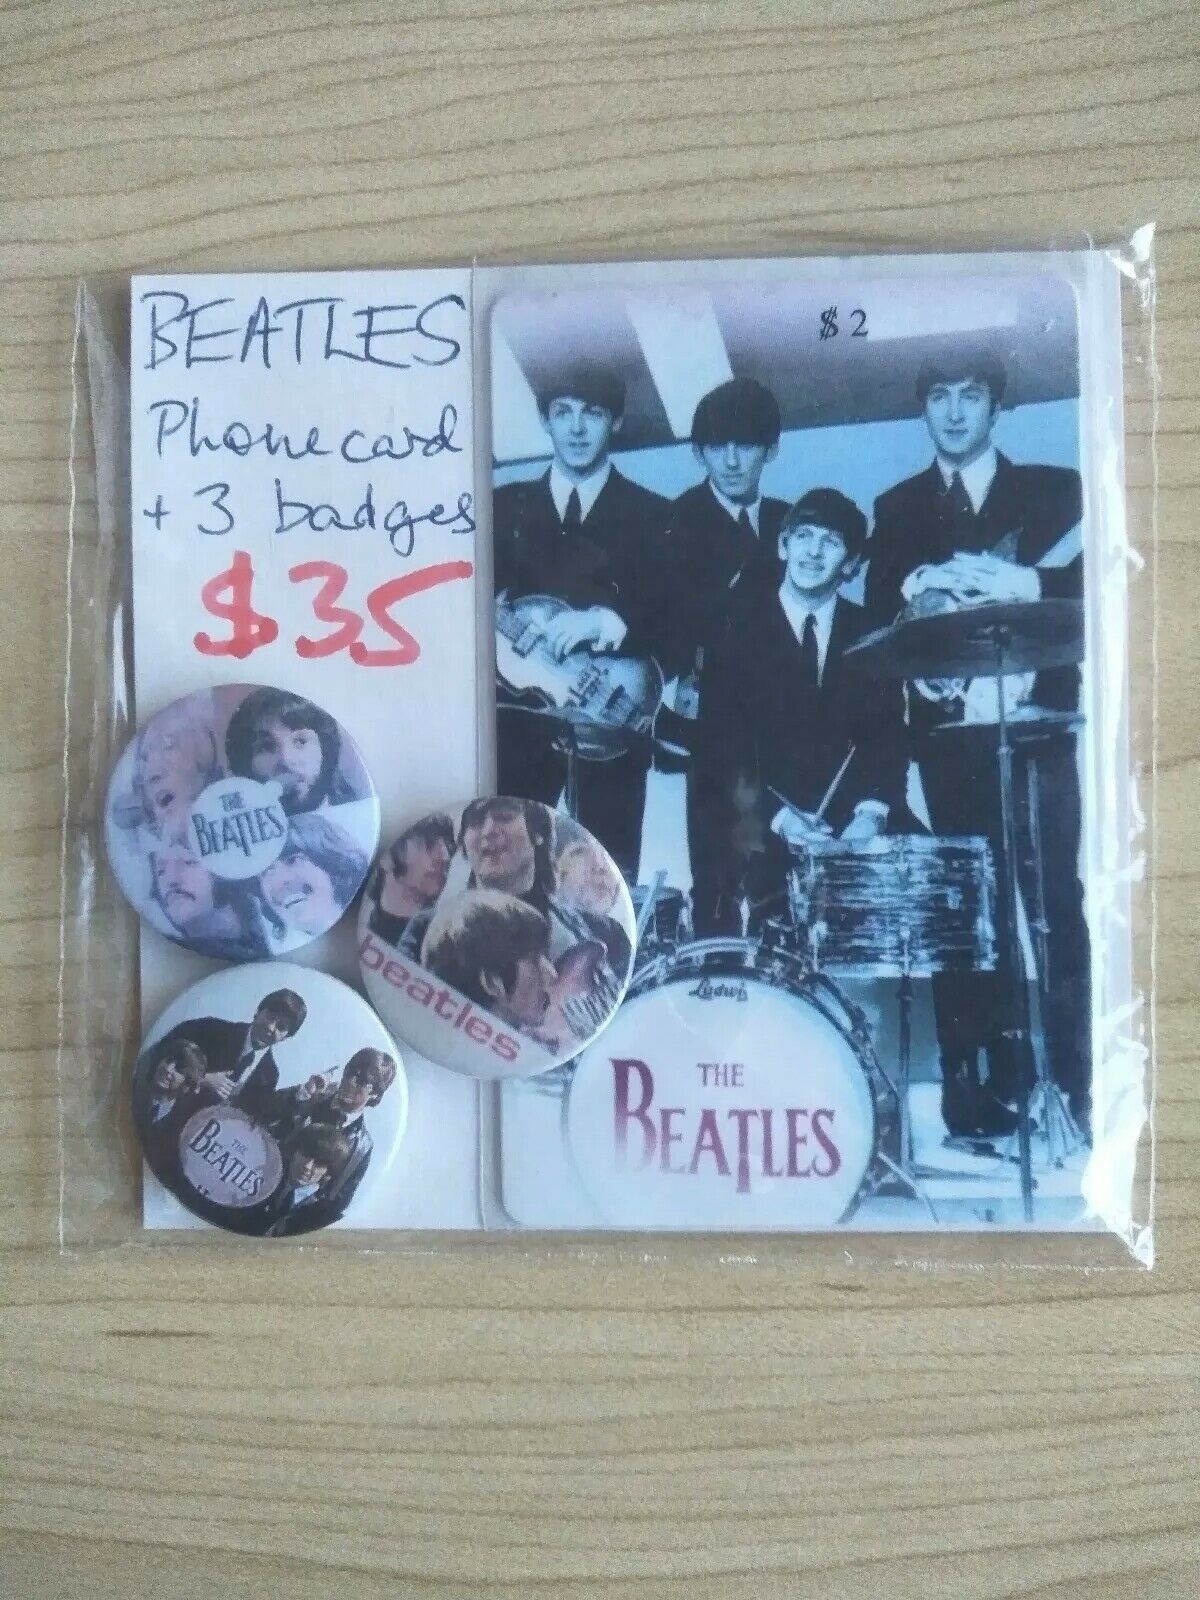 Beatles Phone Card And 3 Badges